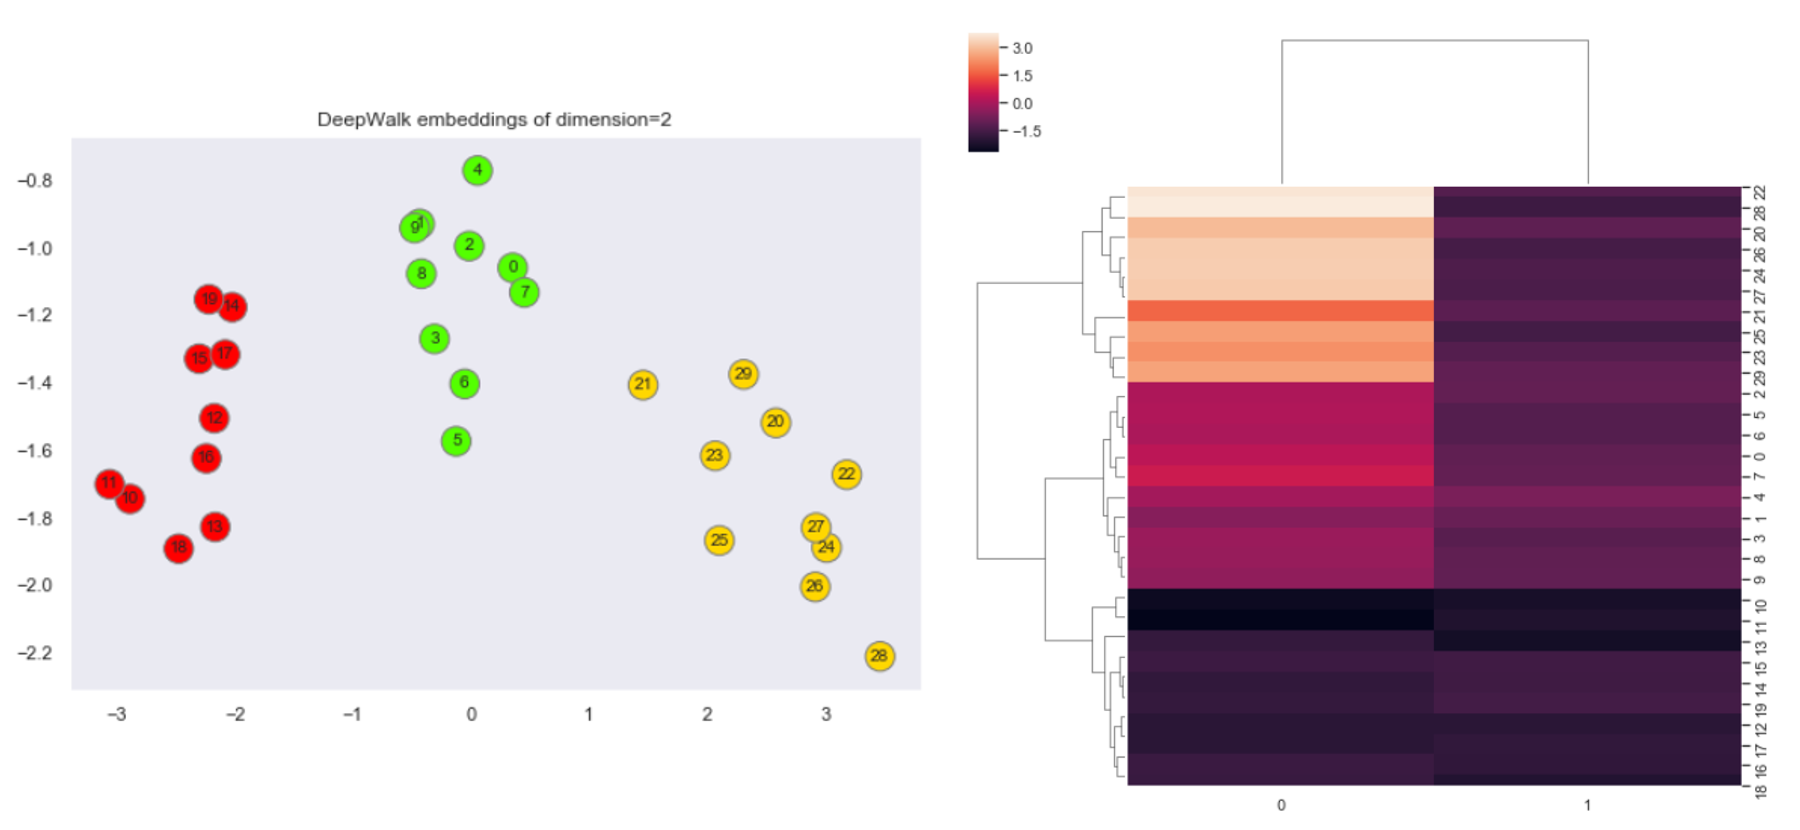 Figure 11: Left: The node embeddings (size=2) of the graph. Right: The heatmap of the embeddings.